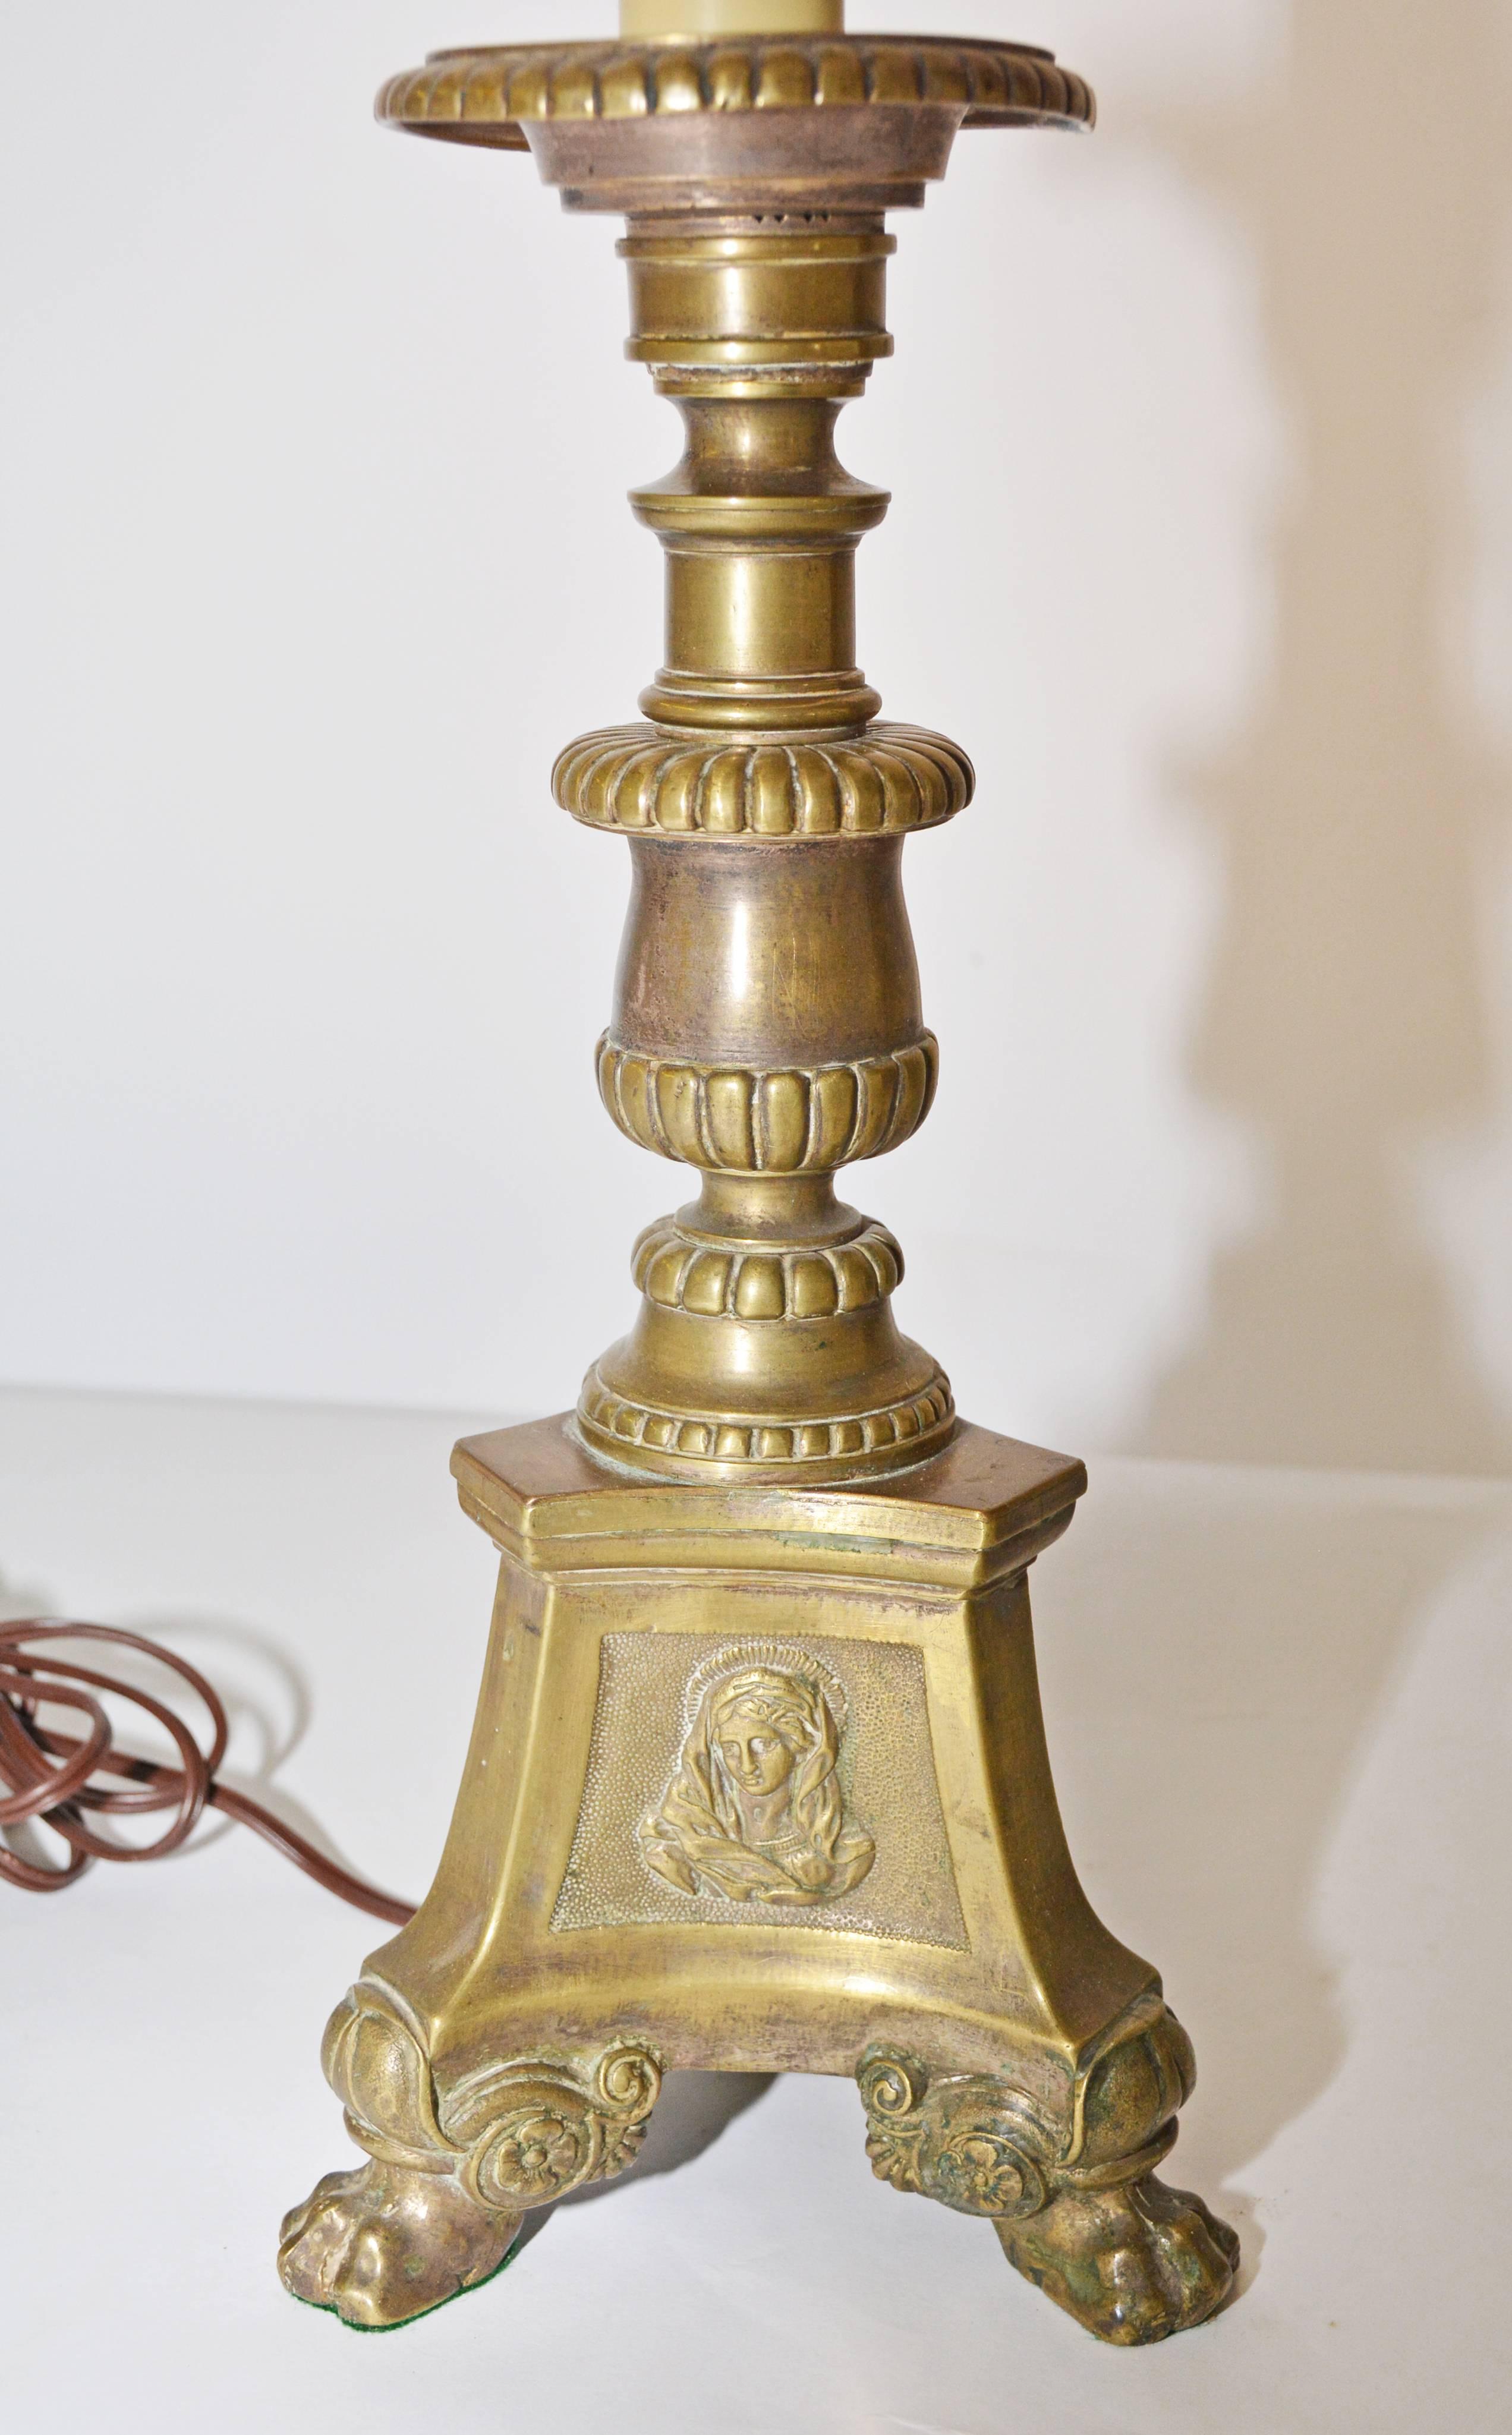 The lamp base is made from three-sided bronze altar candlestick embellished with religious symbols en relief, as well as classical detailing and claw feet. The shade is for photo purposes only.  It has some staining.  Can be included if needed--no